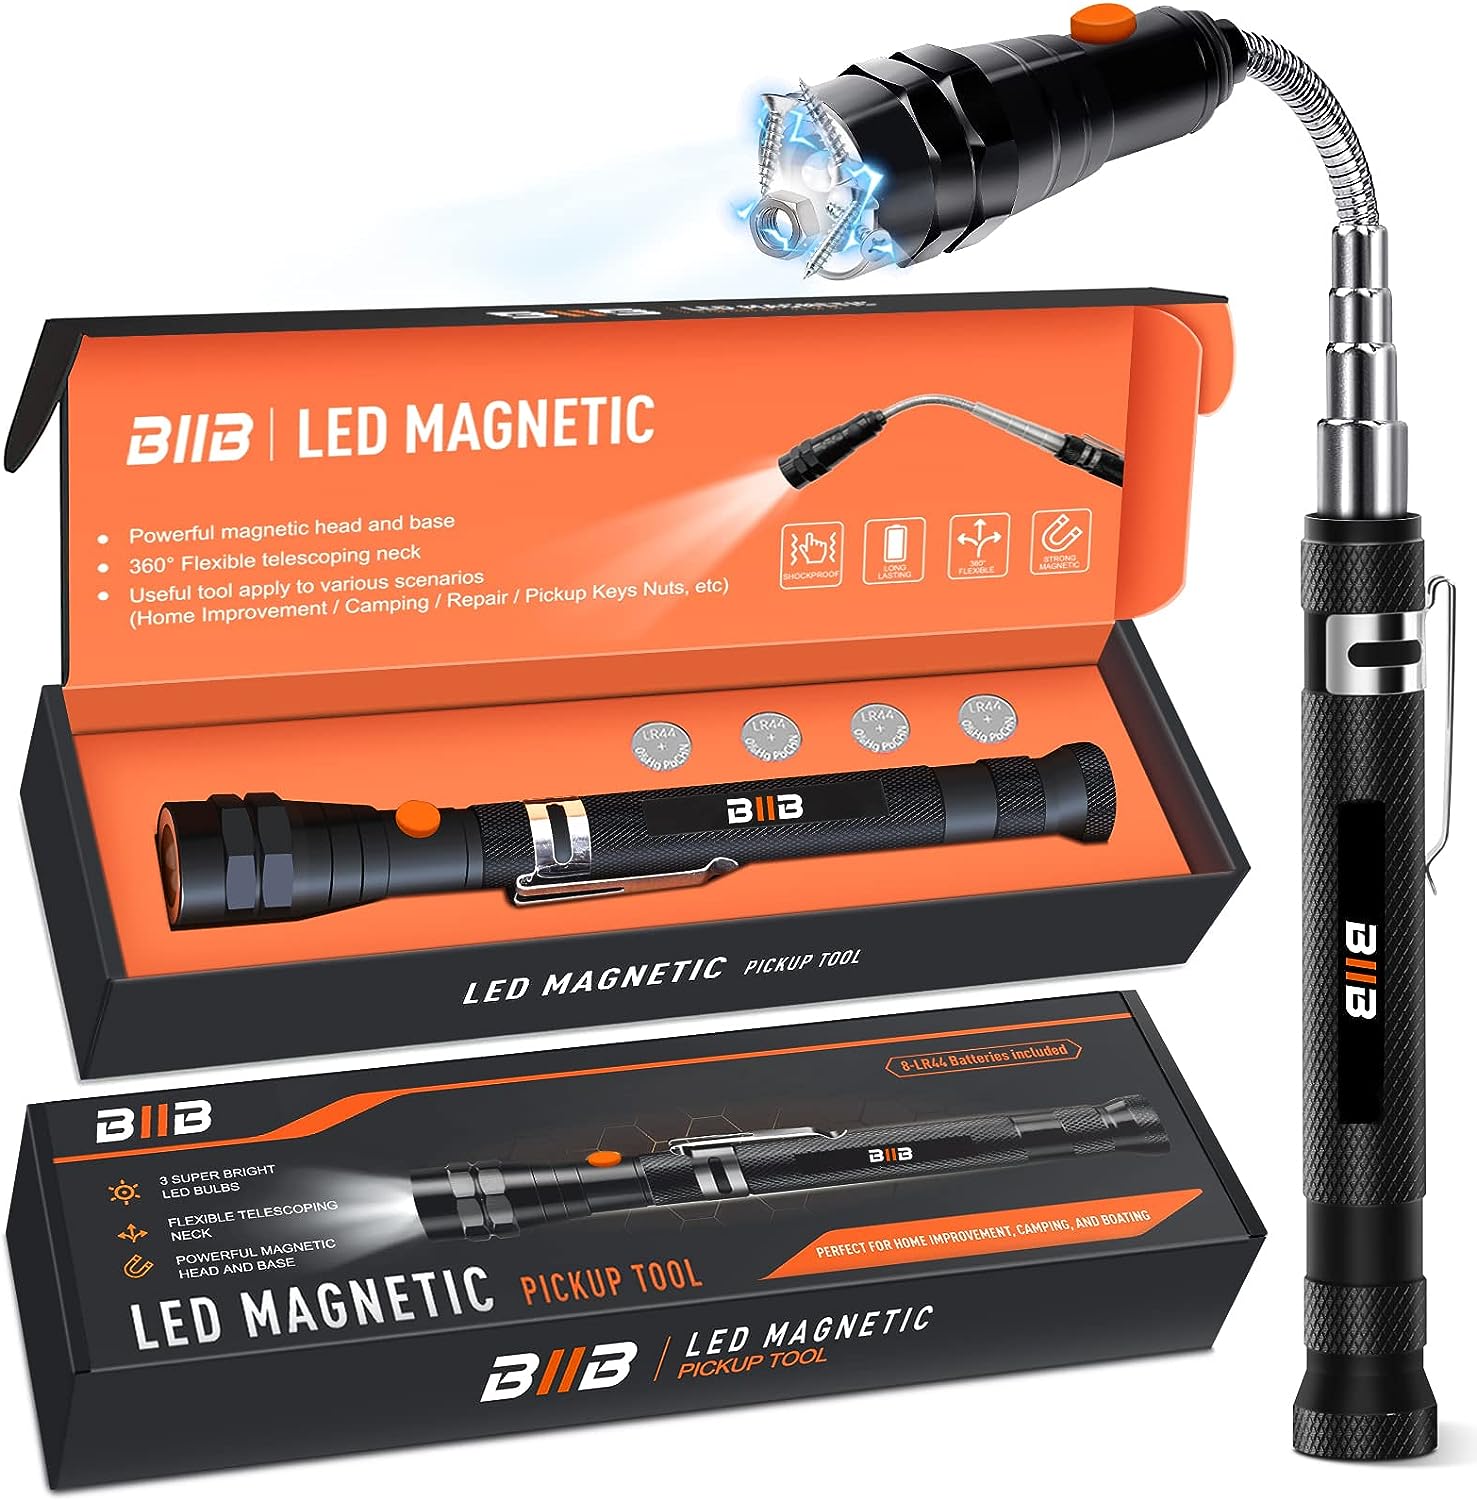 Gifts for Men, BIIB Mens Gifts for Dad Gifts for Men Who Have Everything, Gadgets for Men Birthday Gifts for Him, Magnetic Tool with LED, Christmas Gifts for Him Stocking Fillers for Men